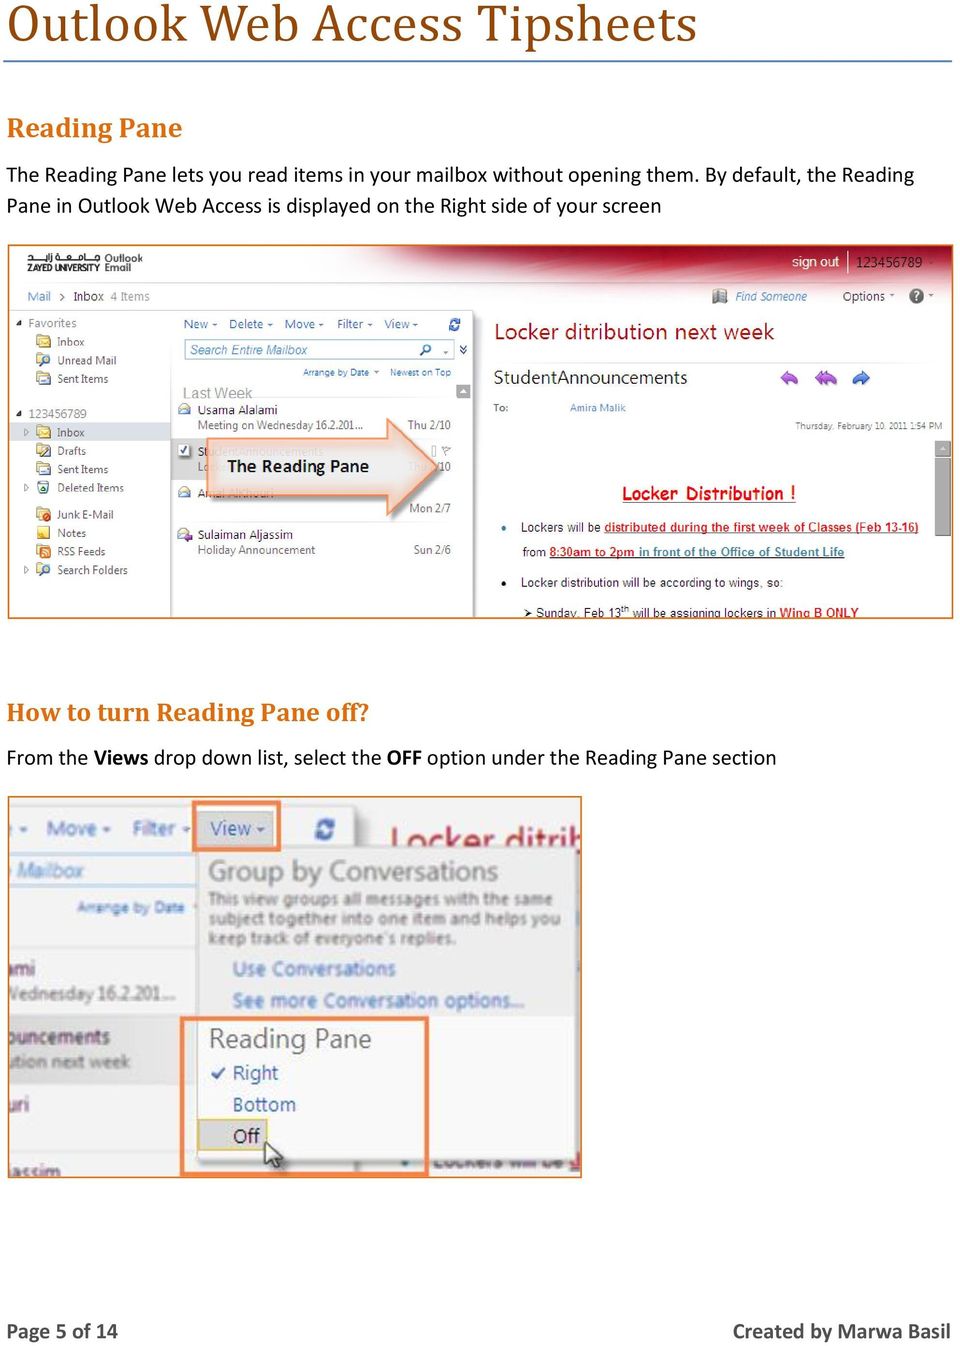 By default, the Reading Pane in Outlook Web Access is displayed on the Right